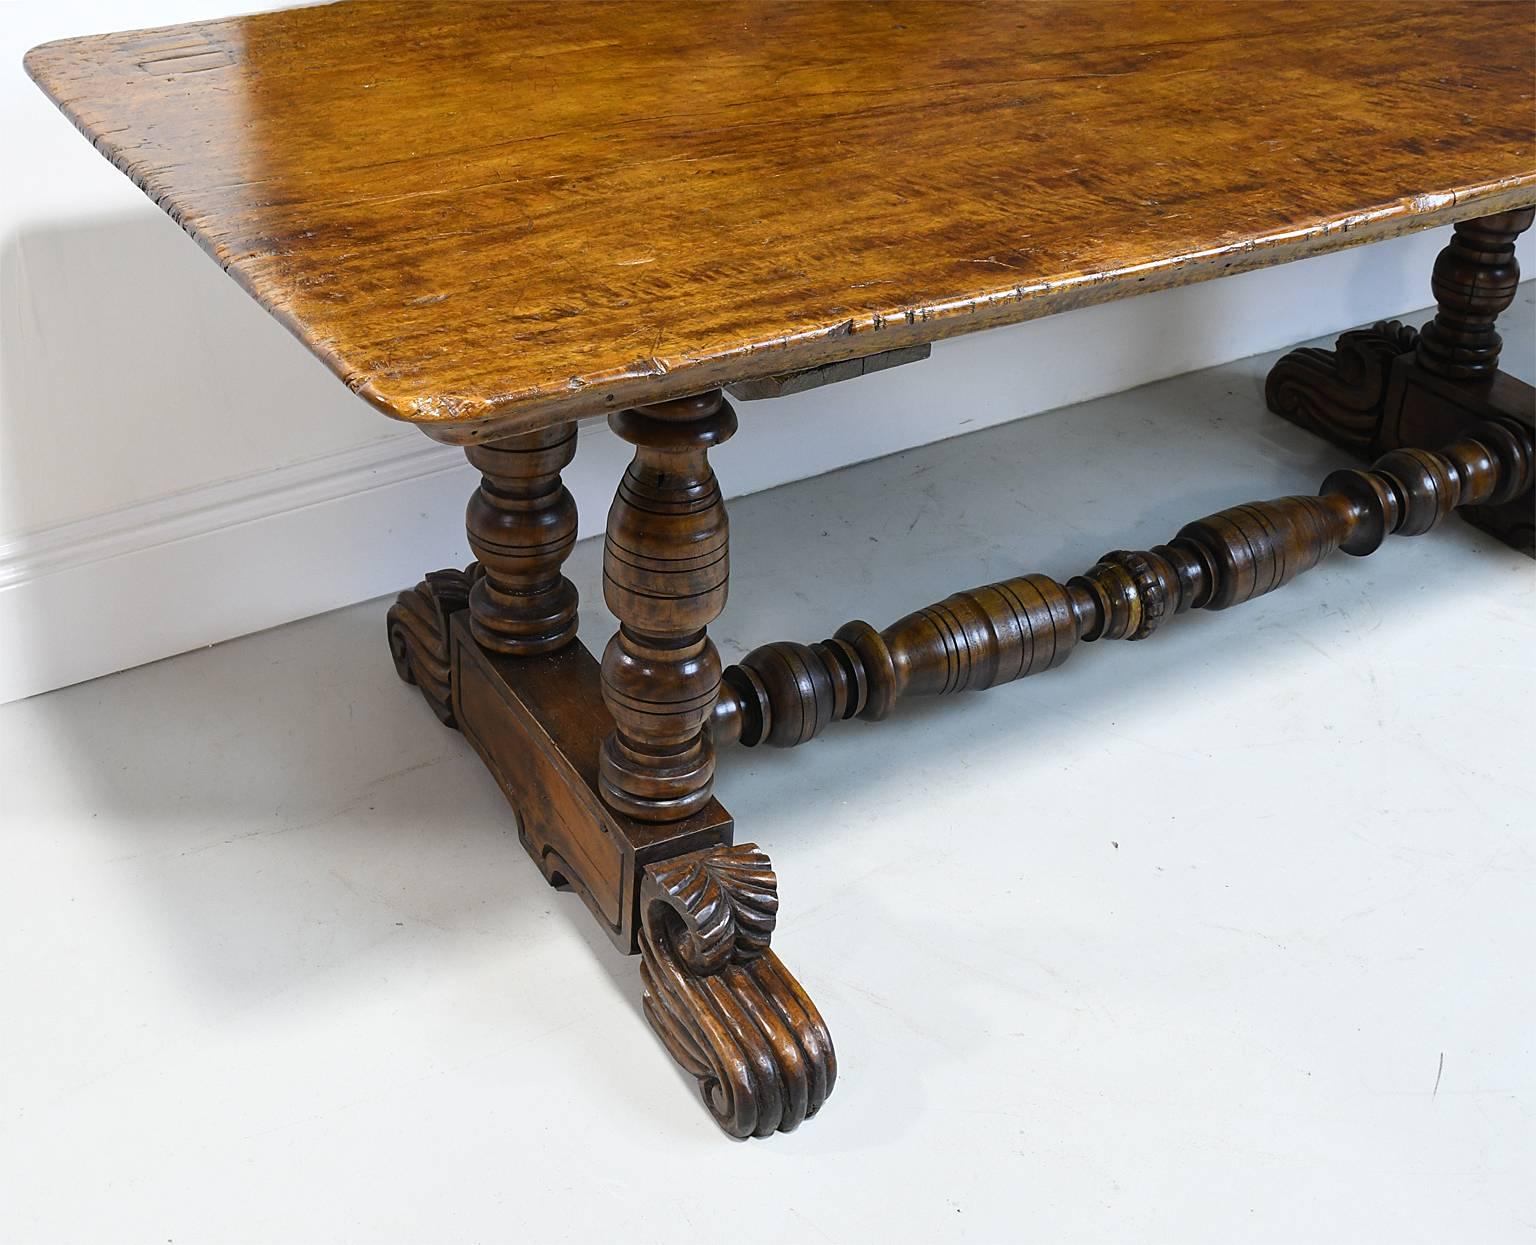 Philippine 19th Century Spanish Colonial Rustic Dining Table with Carved Trestle Base